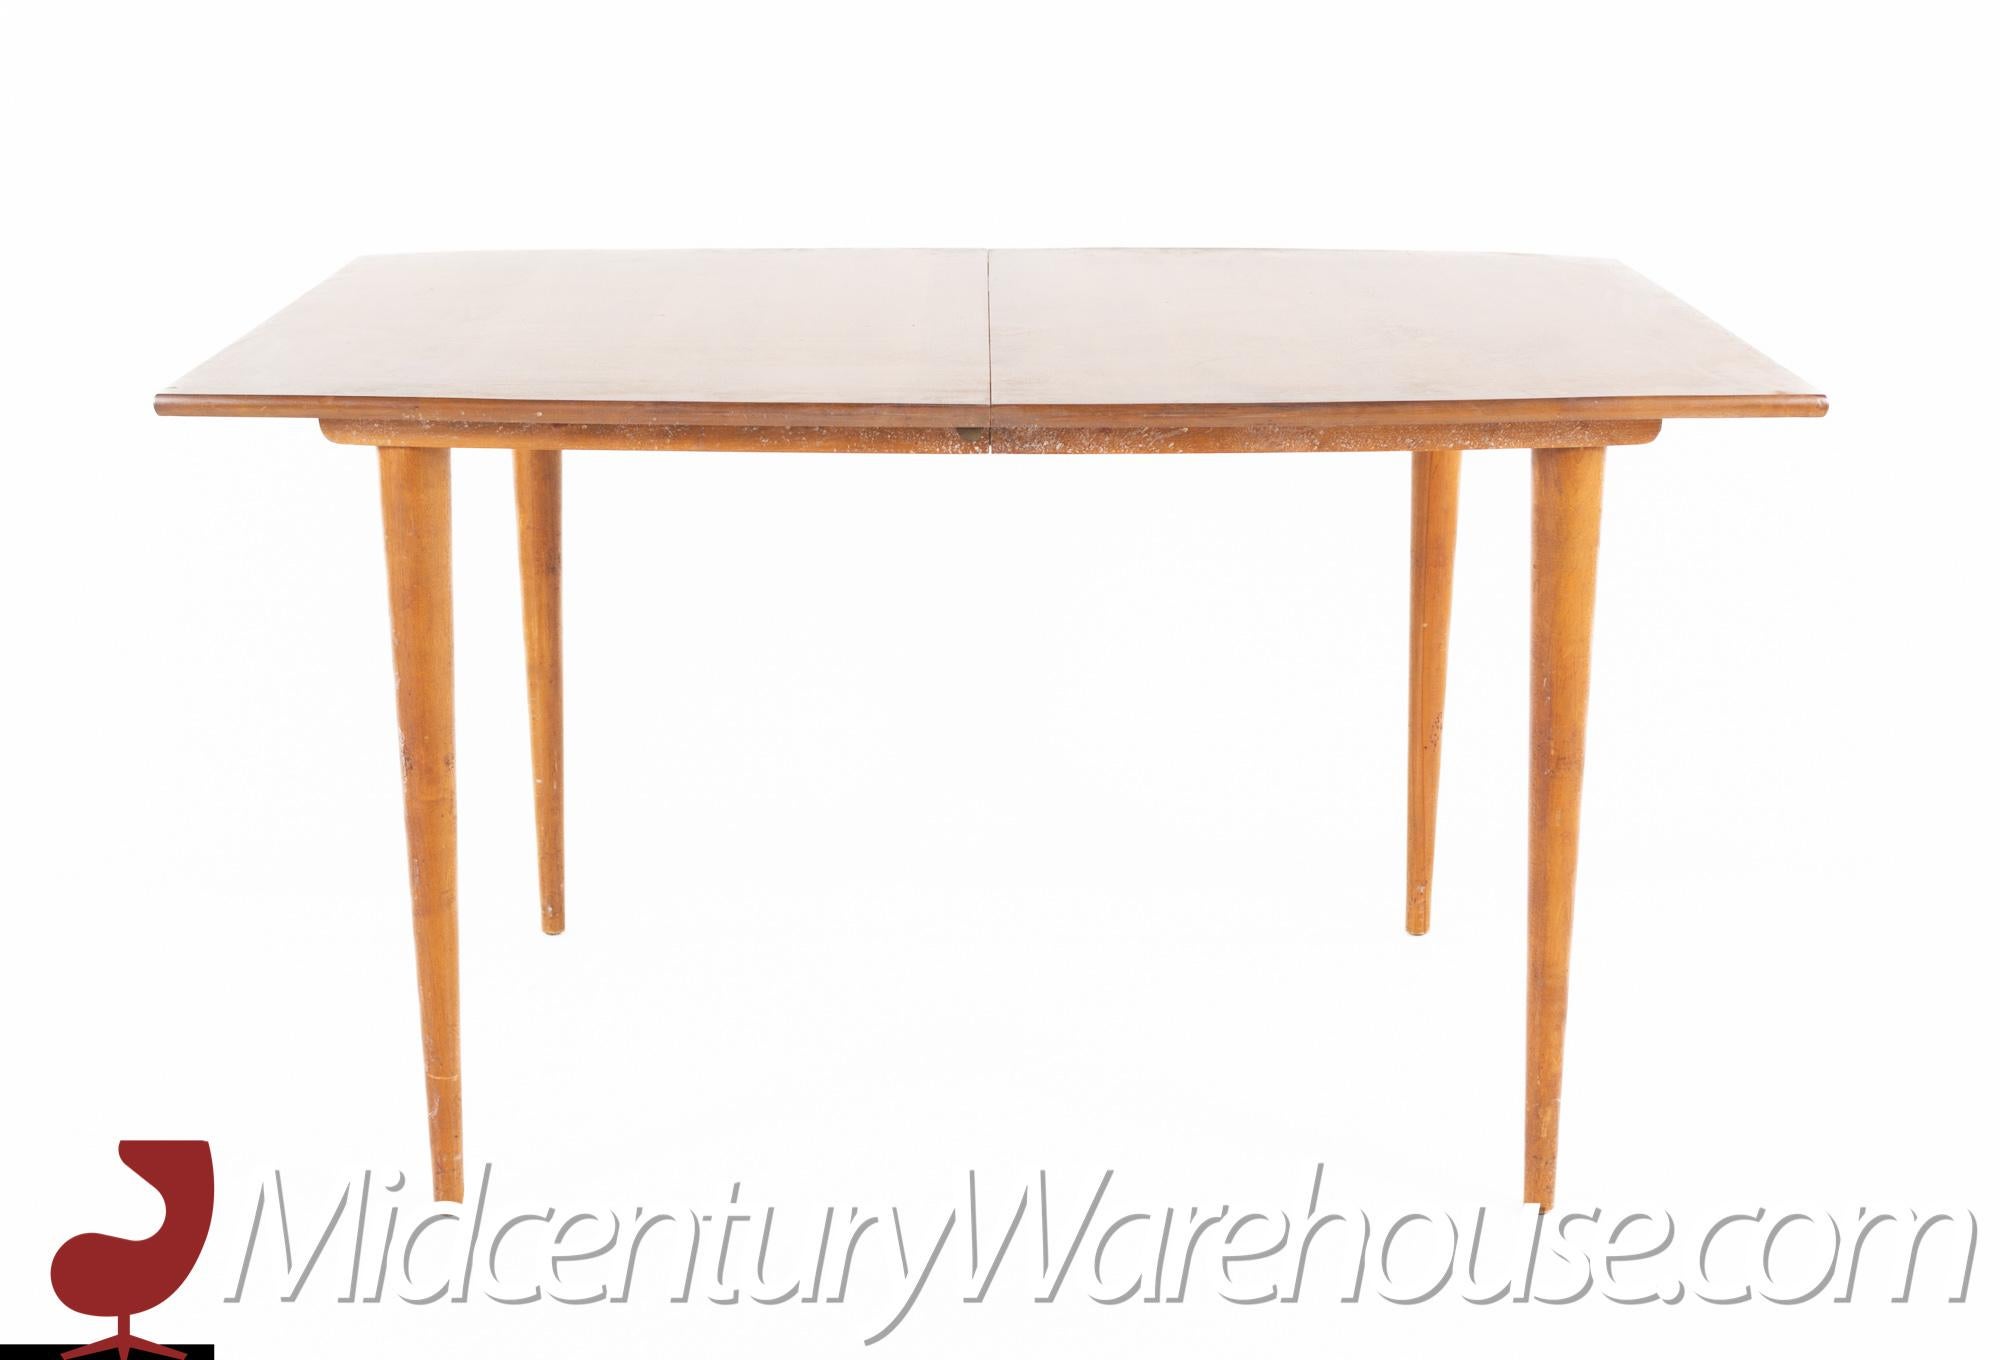 Conant Ball style mid century blond rectangular dining table with peg legs.

This table measures: 54 wide x 39 deep x 30.25 high, with a chair clearance of 28 inches.

All pieces of furniture can be had in what we call restored vintage